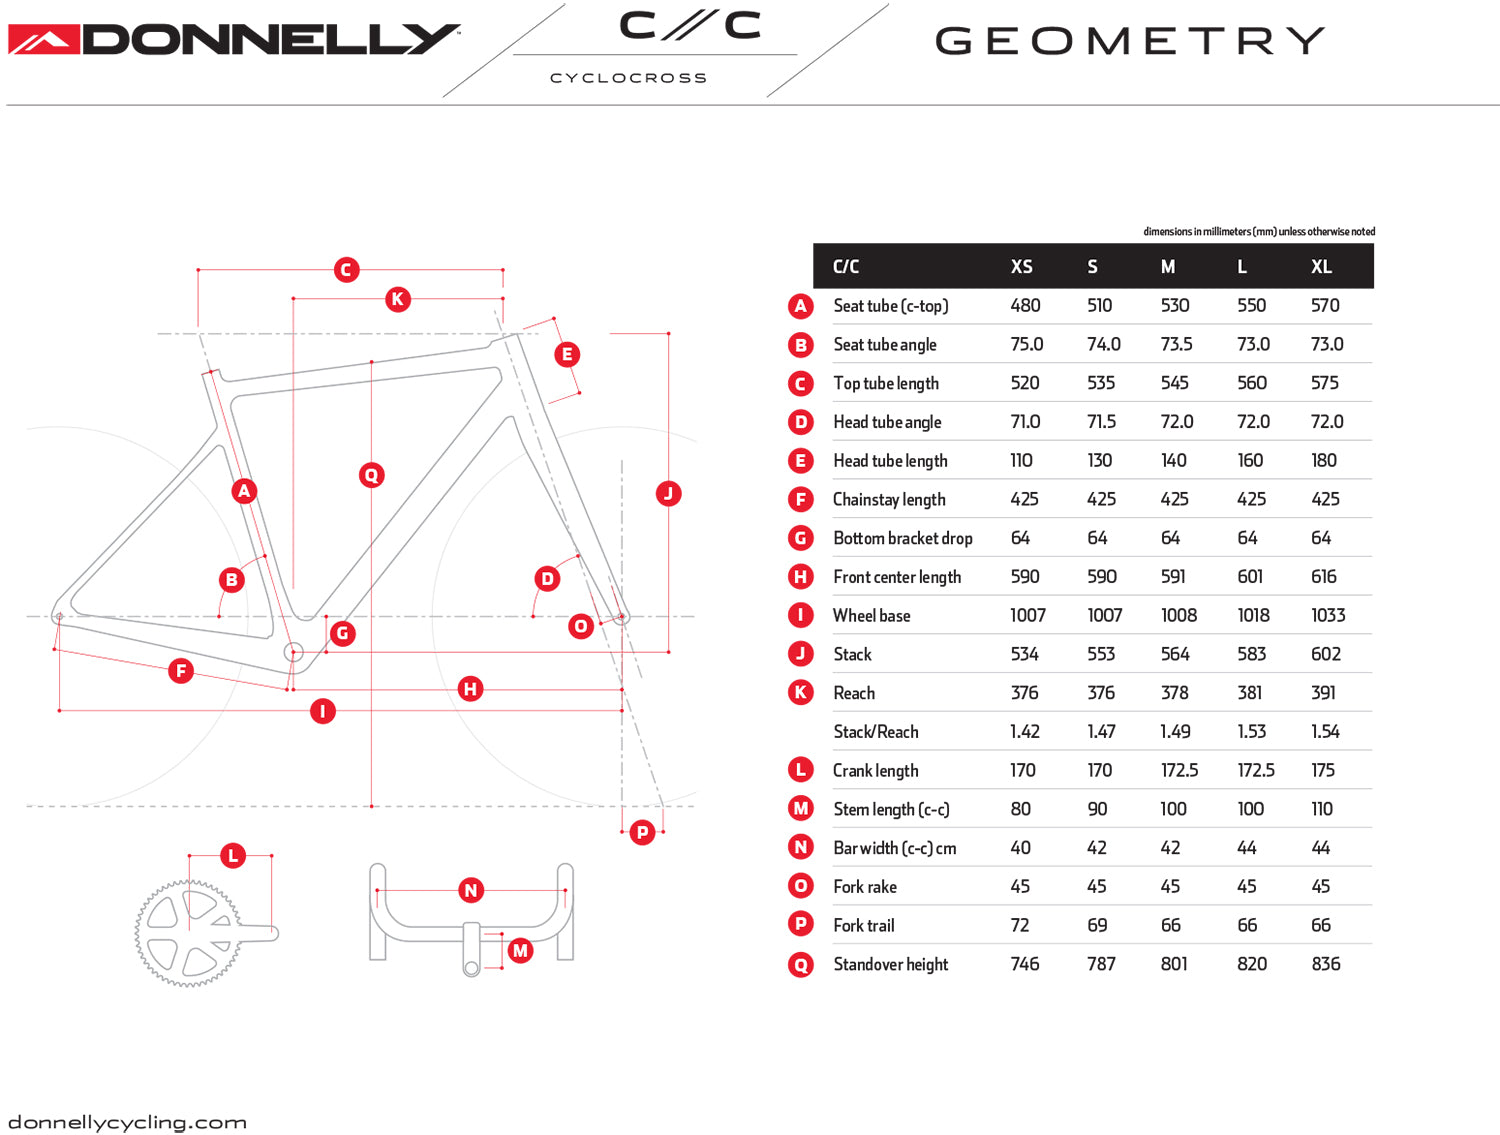 Donnelly CC Cyclocross Bike Frame Geometry Chart